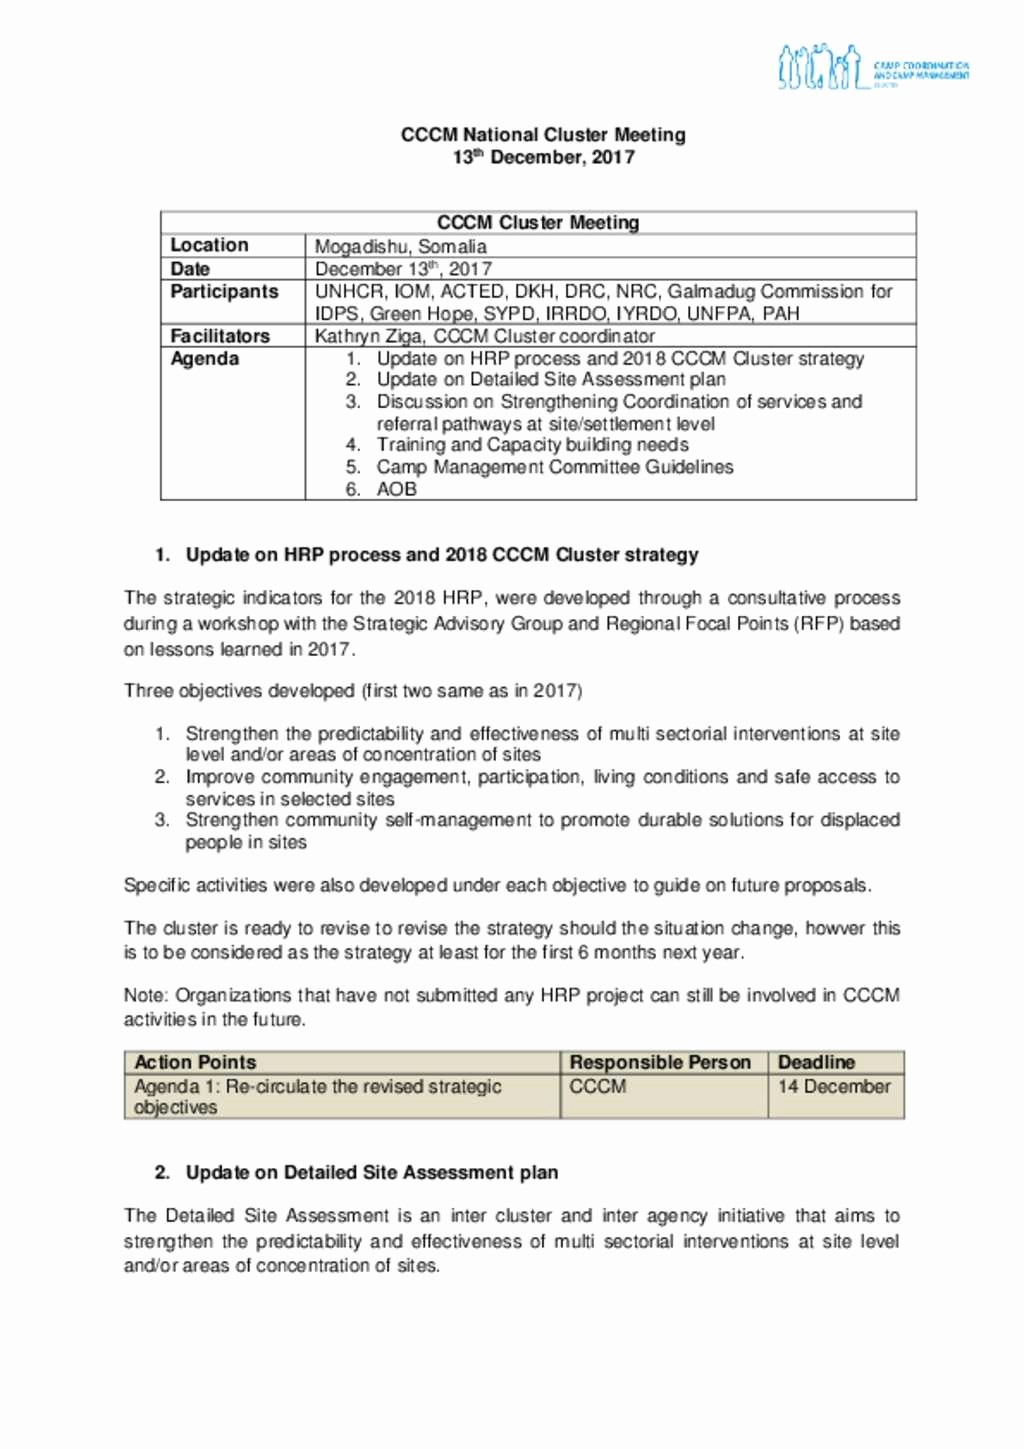 How to Type Up Minutes Elegant Document Cccm Cluster Meeting Minutes 13 December 2017